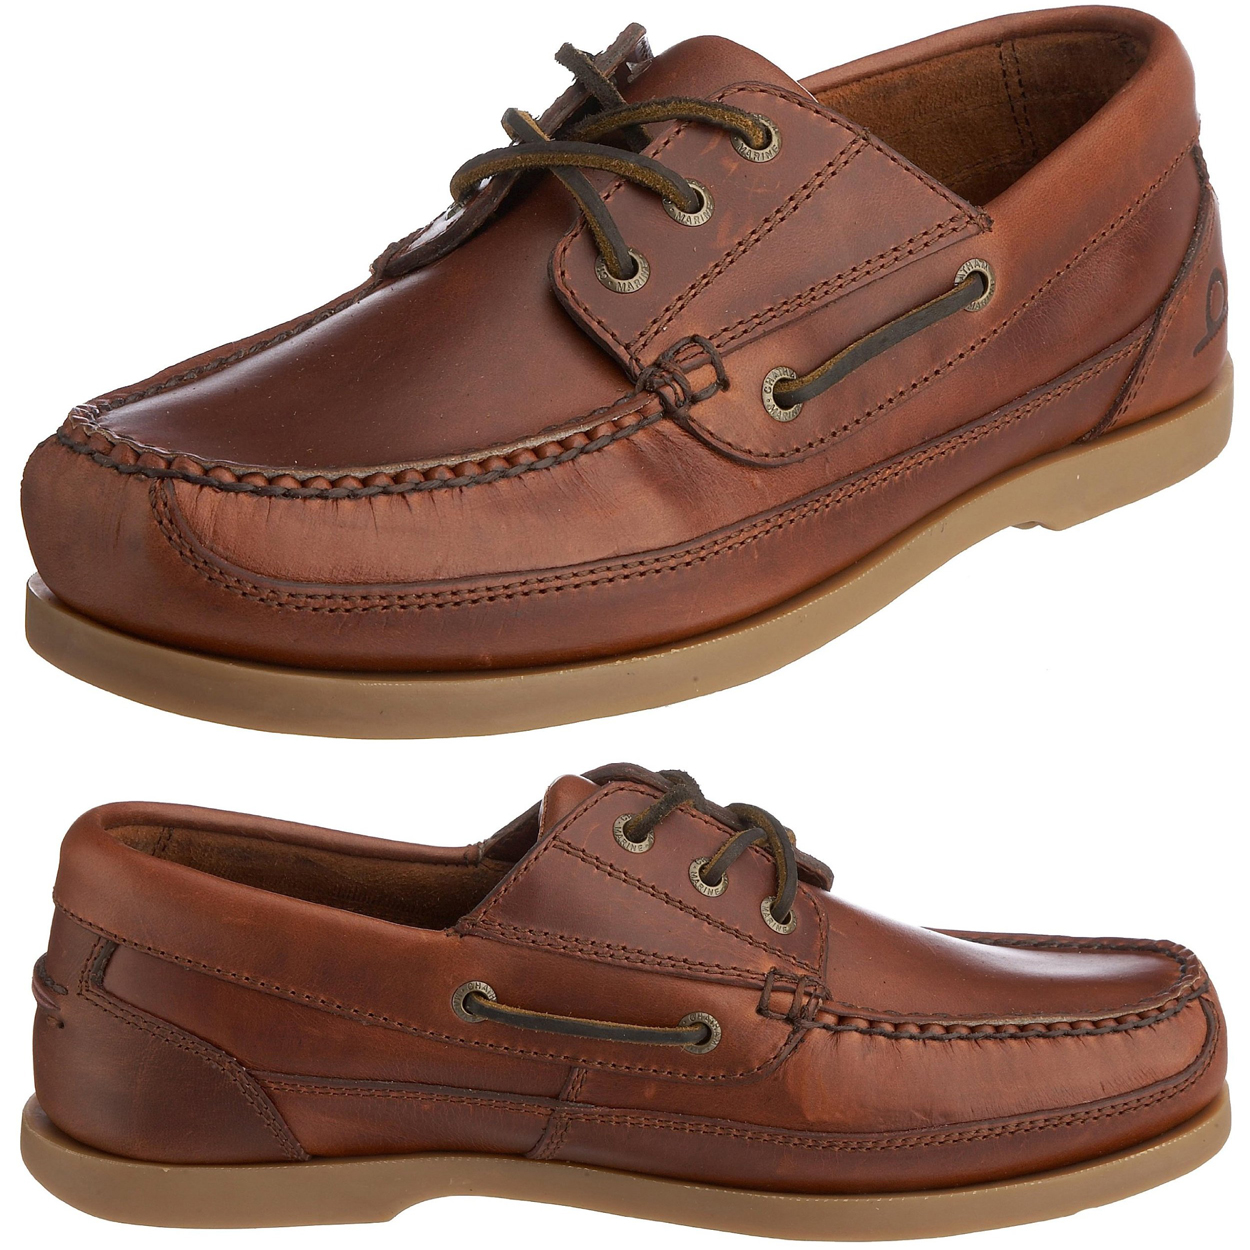 Chatham Rockwell Wide Fit Deck Shoes in Dark Sea Horse 